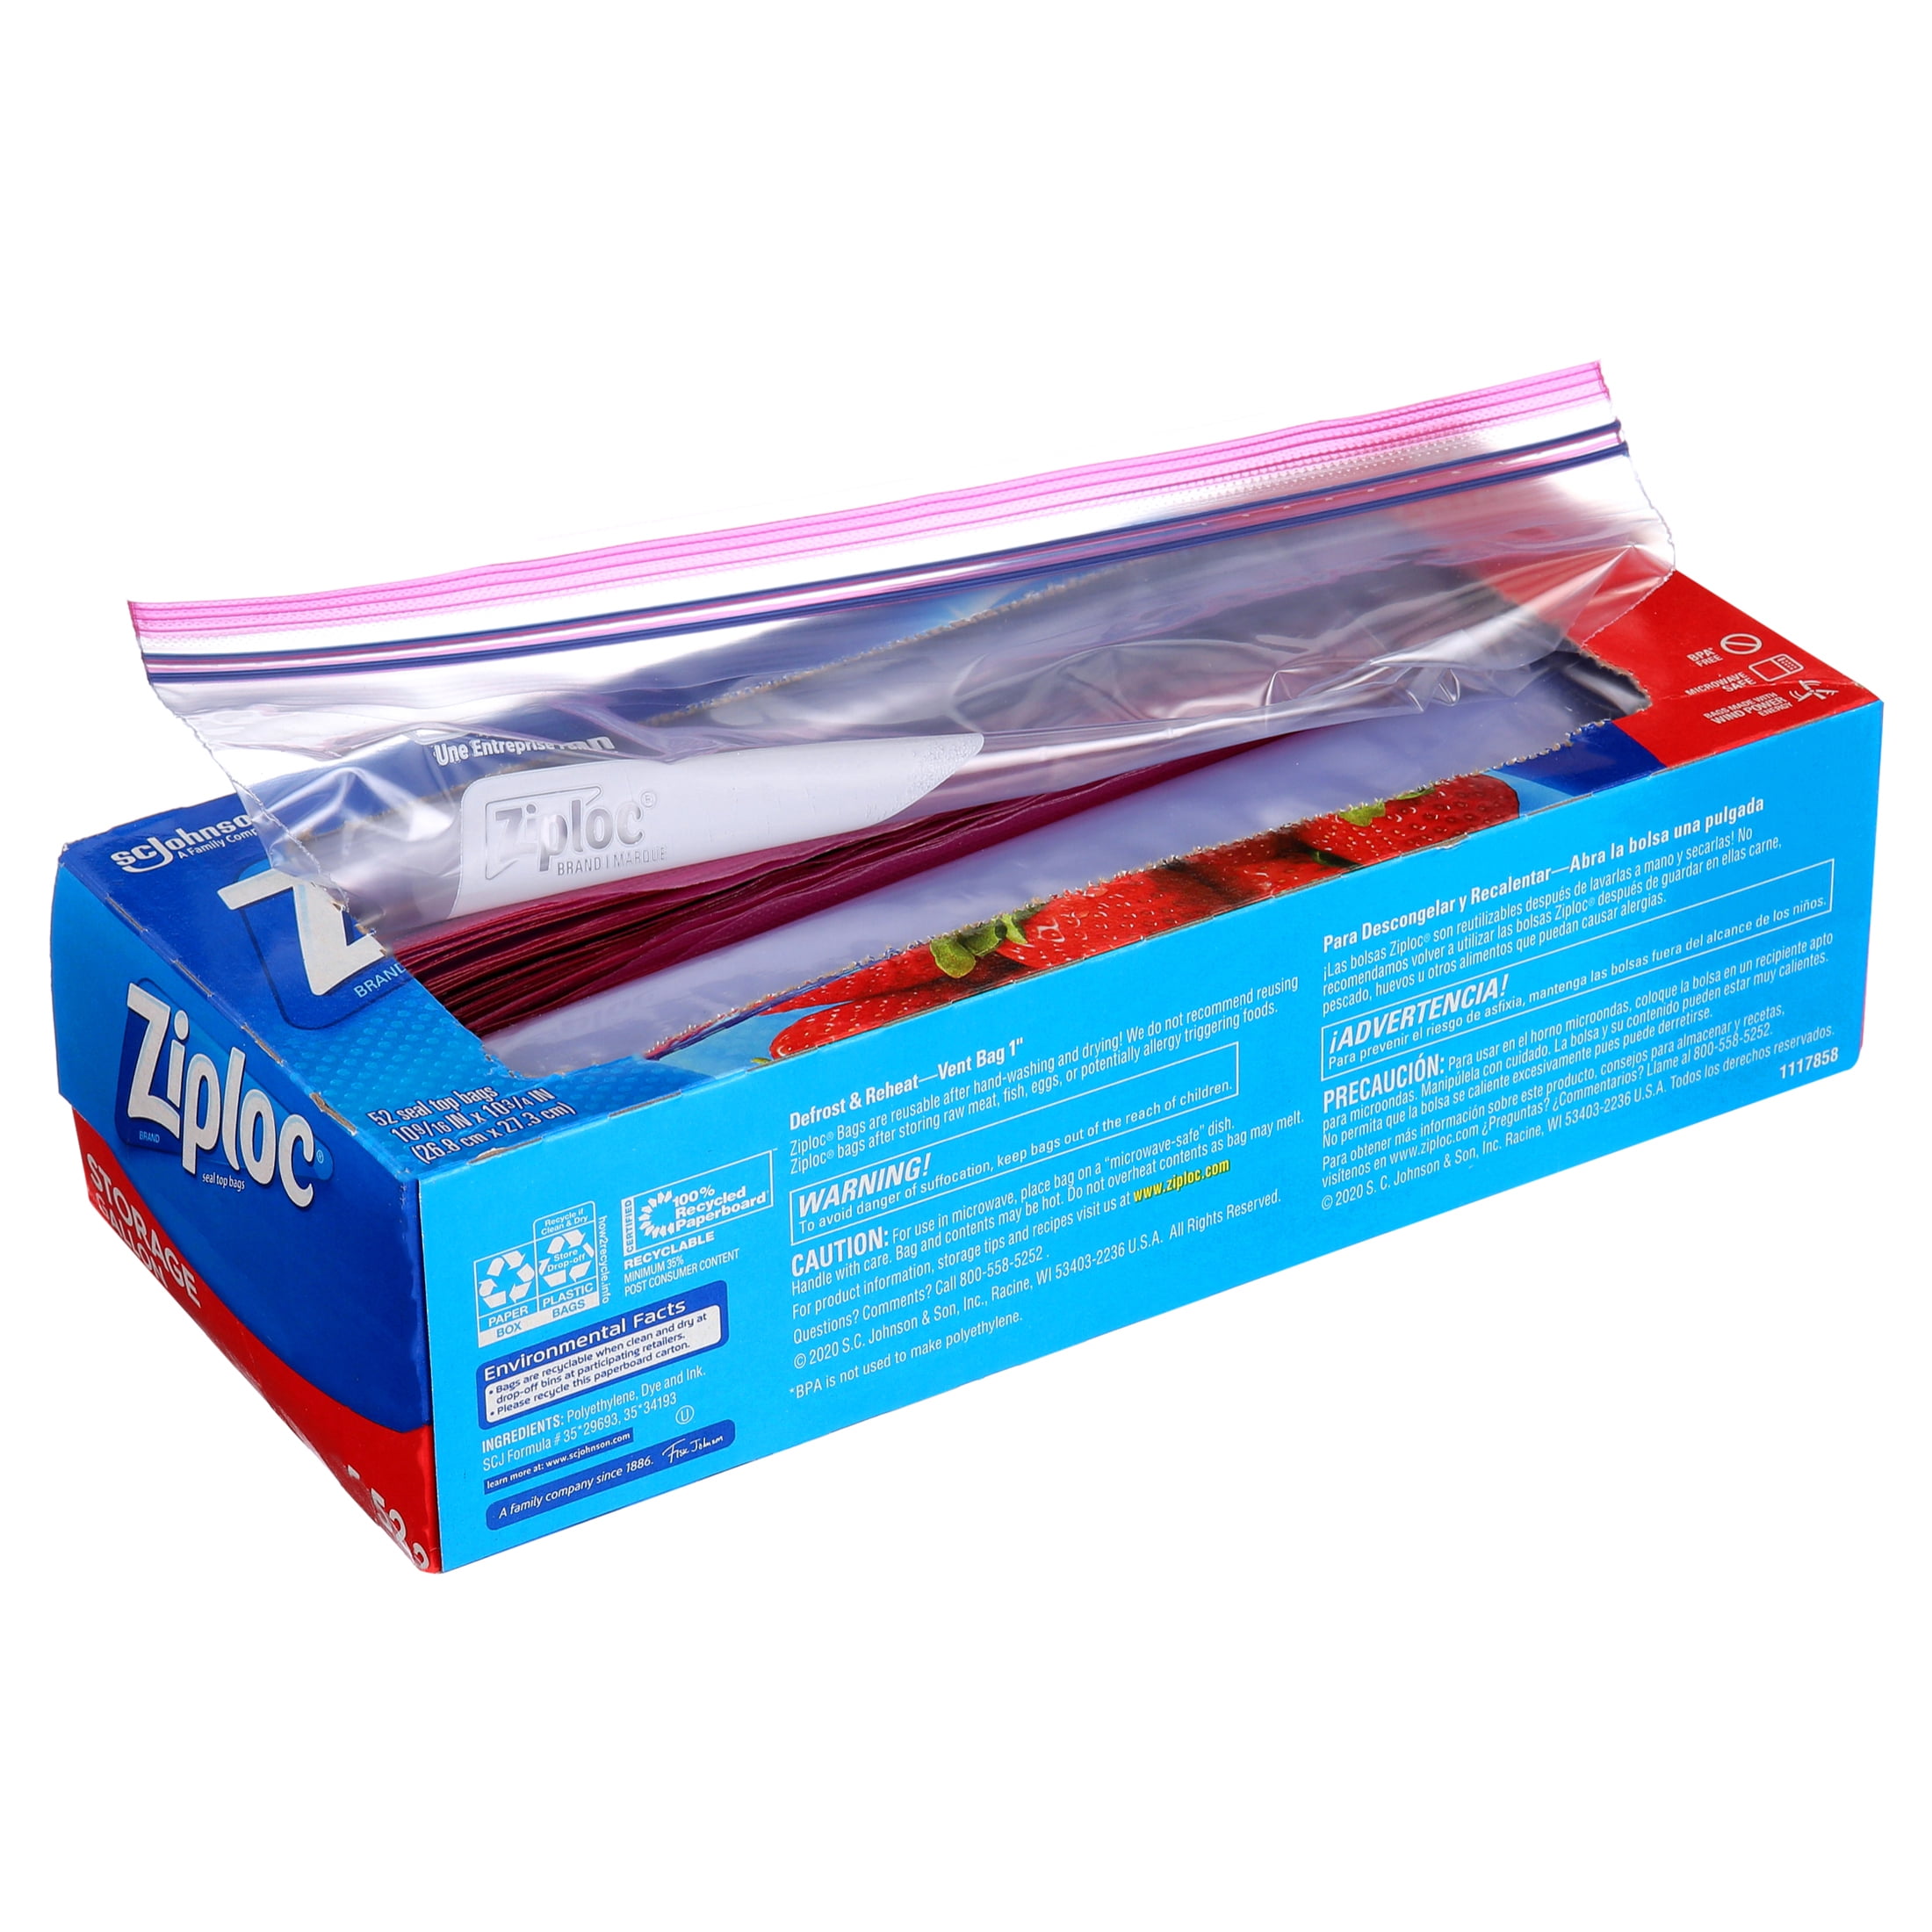 24/7 Bags - Double Zipper Storage Bags, Variety Pack, 4 Sizes, 275 Count, Size: Double Zipper Seal Top - Variety 275 Bags, Clear